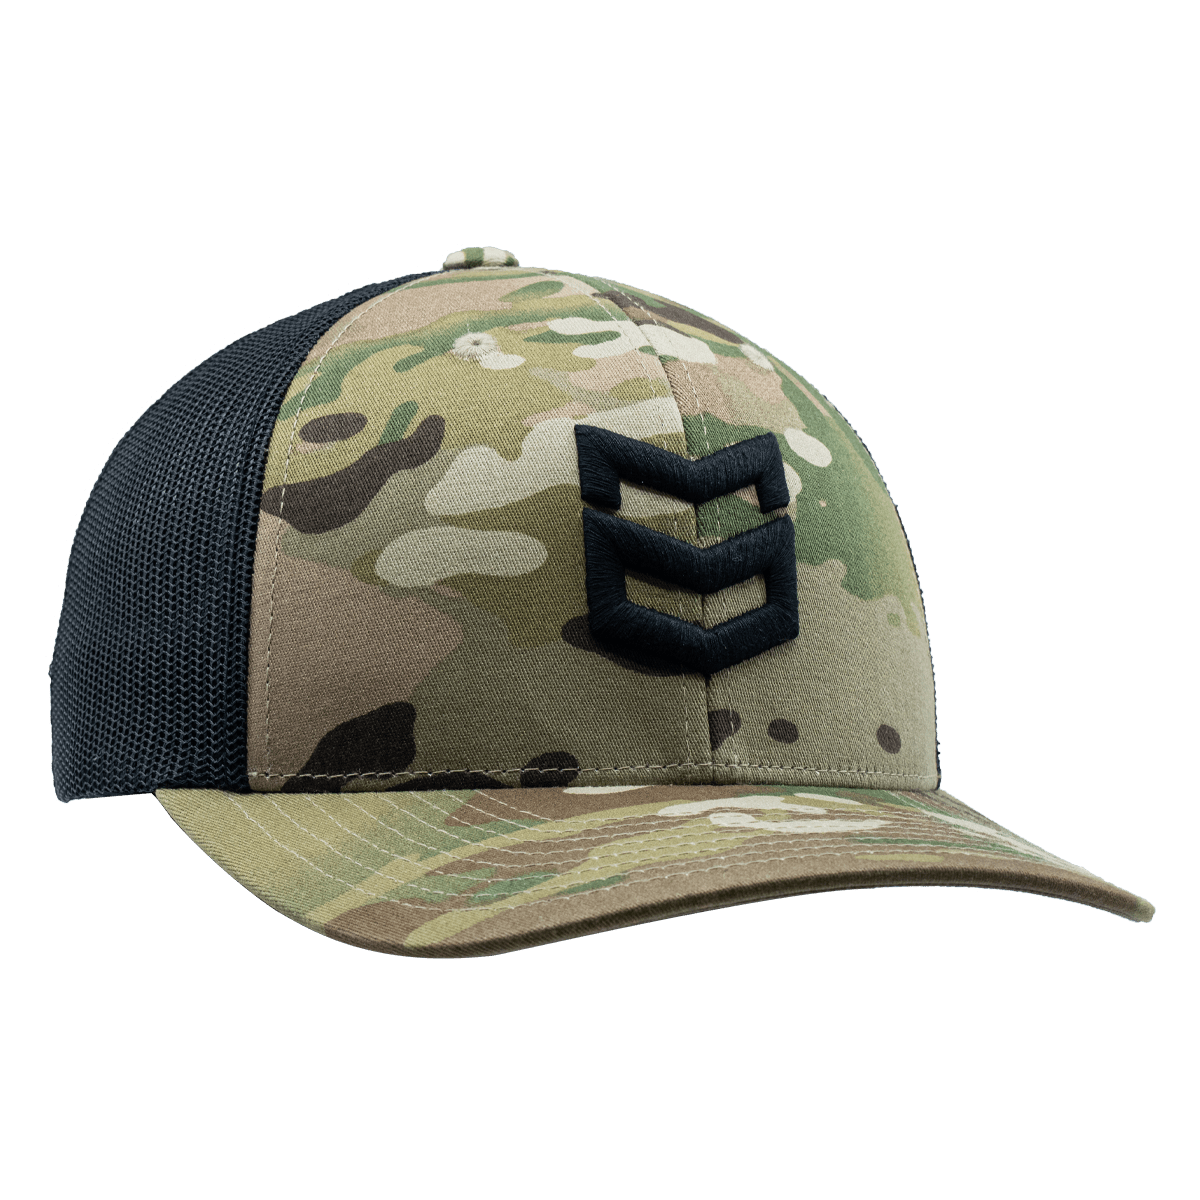 YOUTH MISSION HAT – MTN OPS